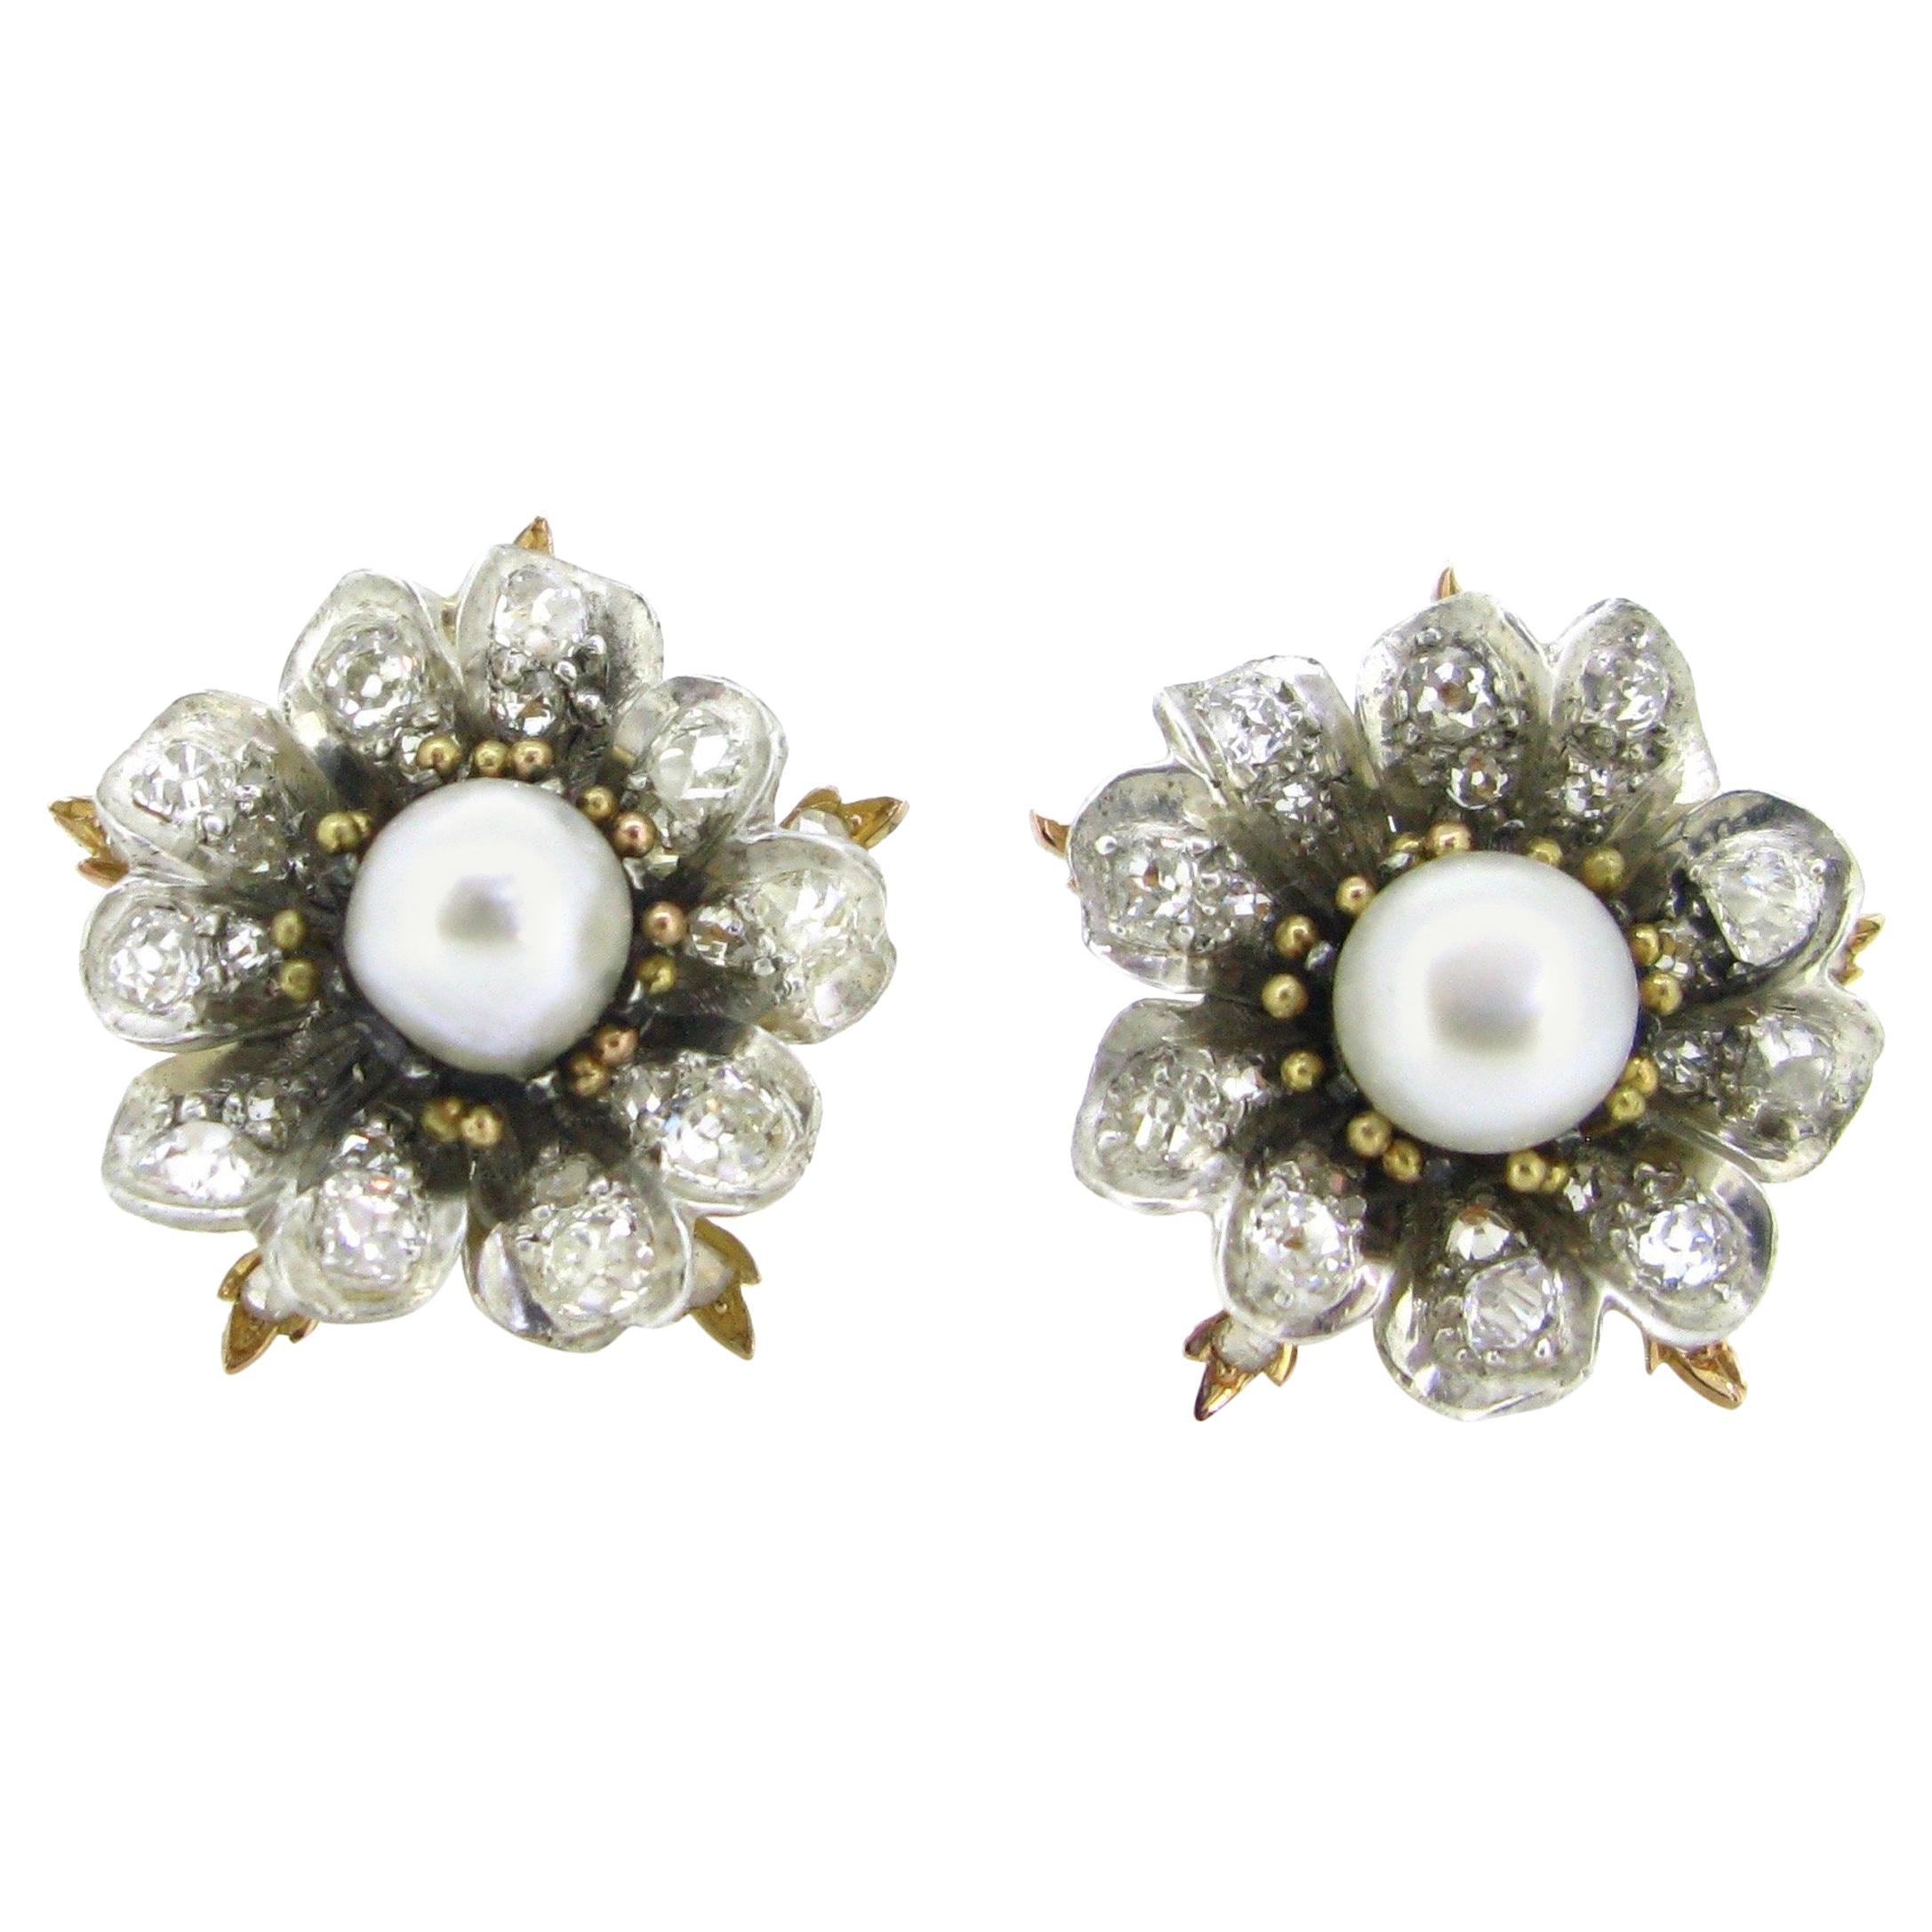 Antique Victorian GCS Report Natural Pearls and Old Cut Diamonds Flower Earrings